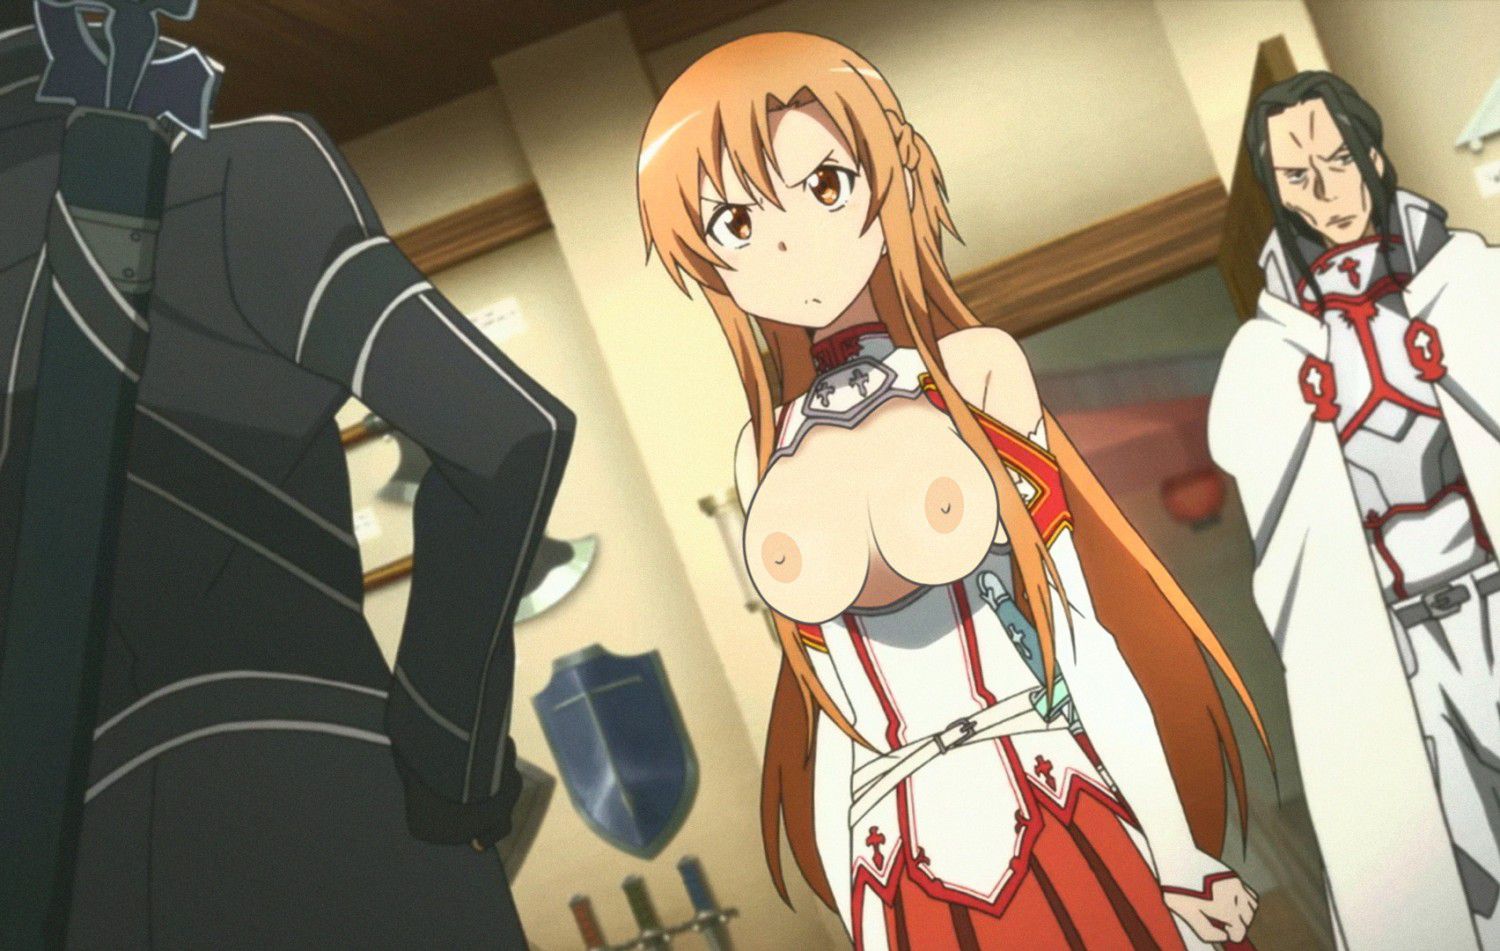 [Sword Art Online (SAO)] No. 50 erotic images such as Kana-chan and straight Leaf Chan tomorrow 18